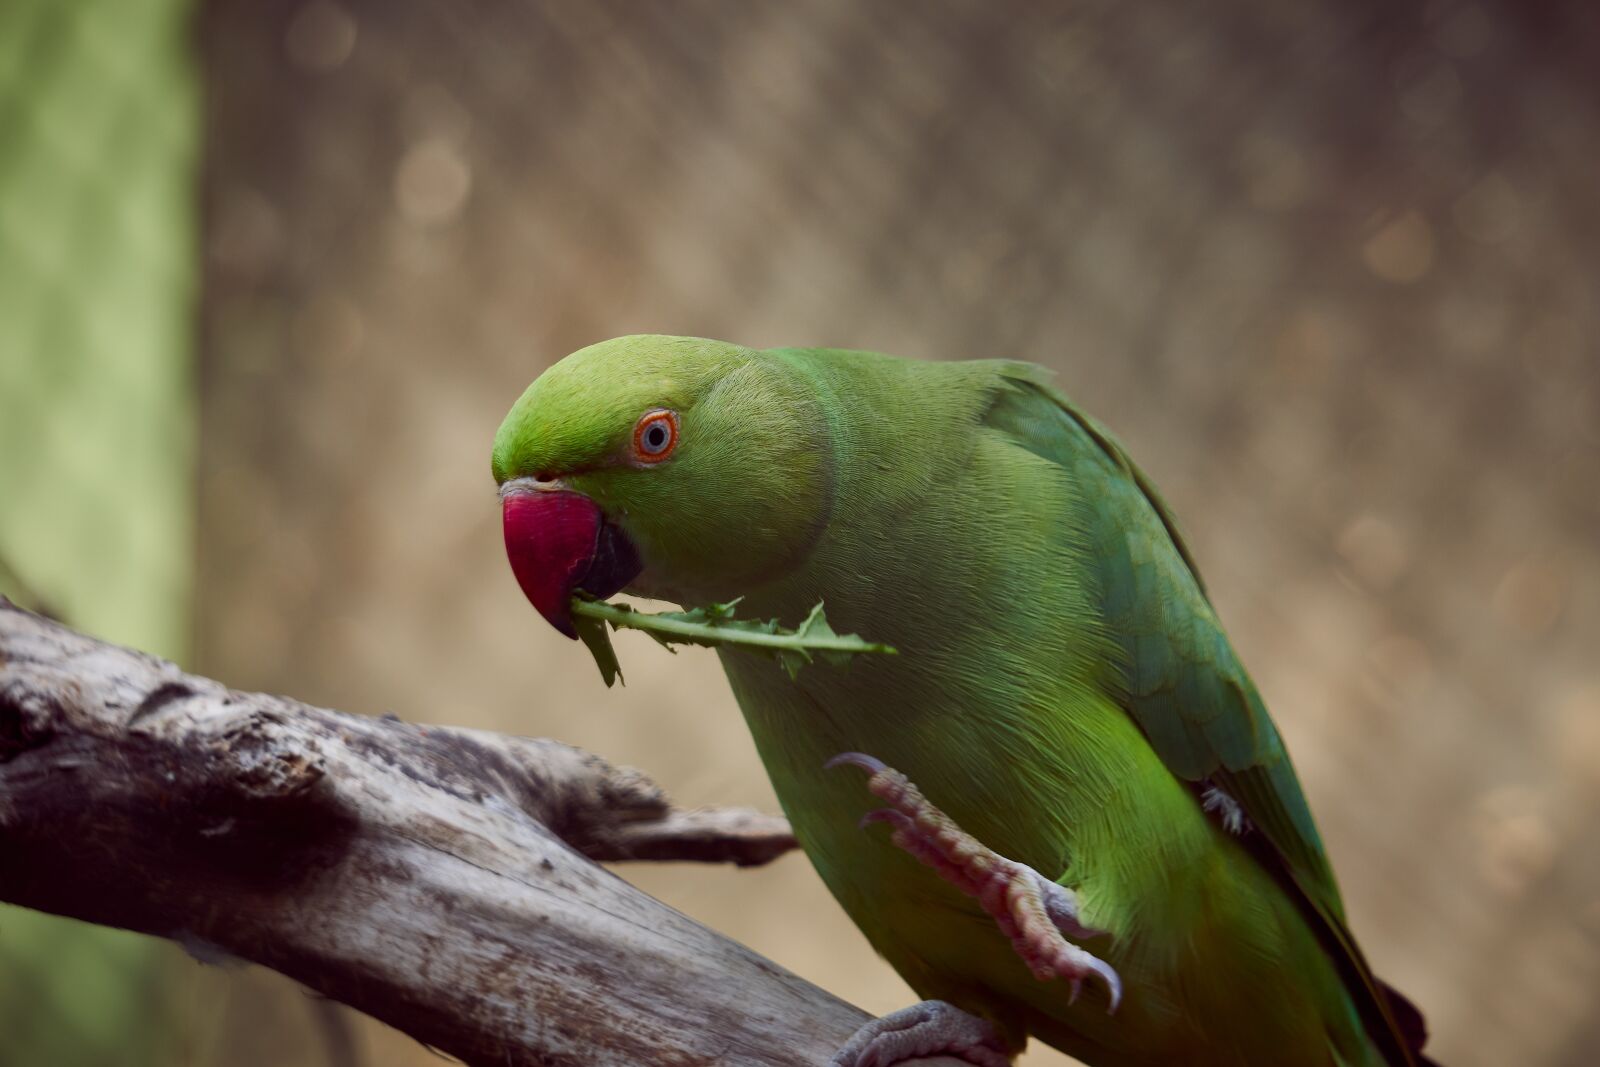 Sony a6000 sample photo. Parrot, bird, nature photography